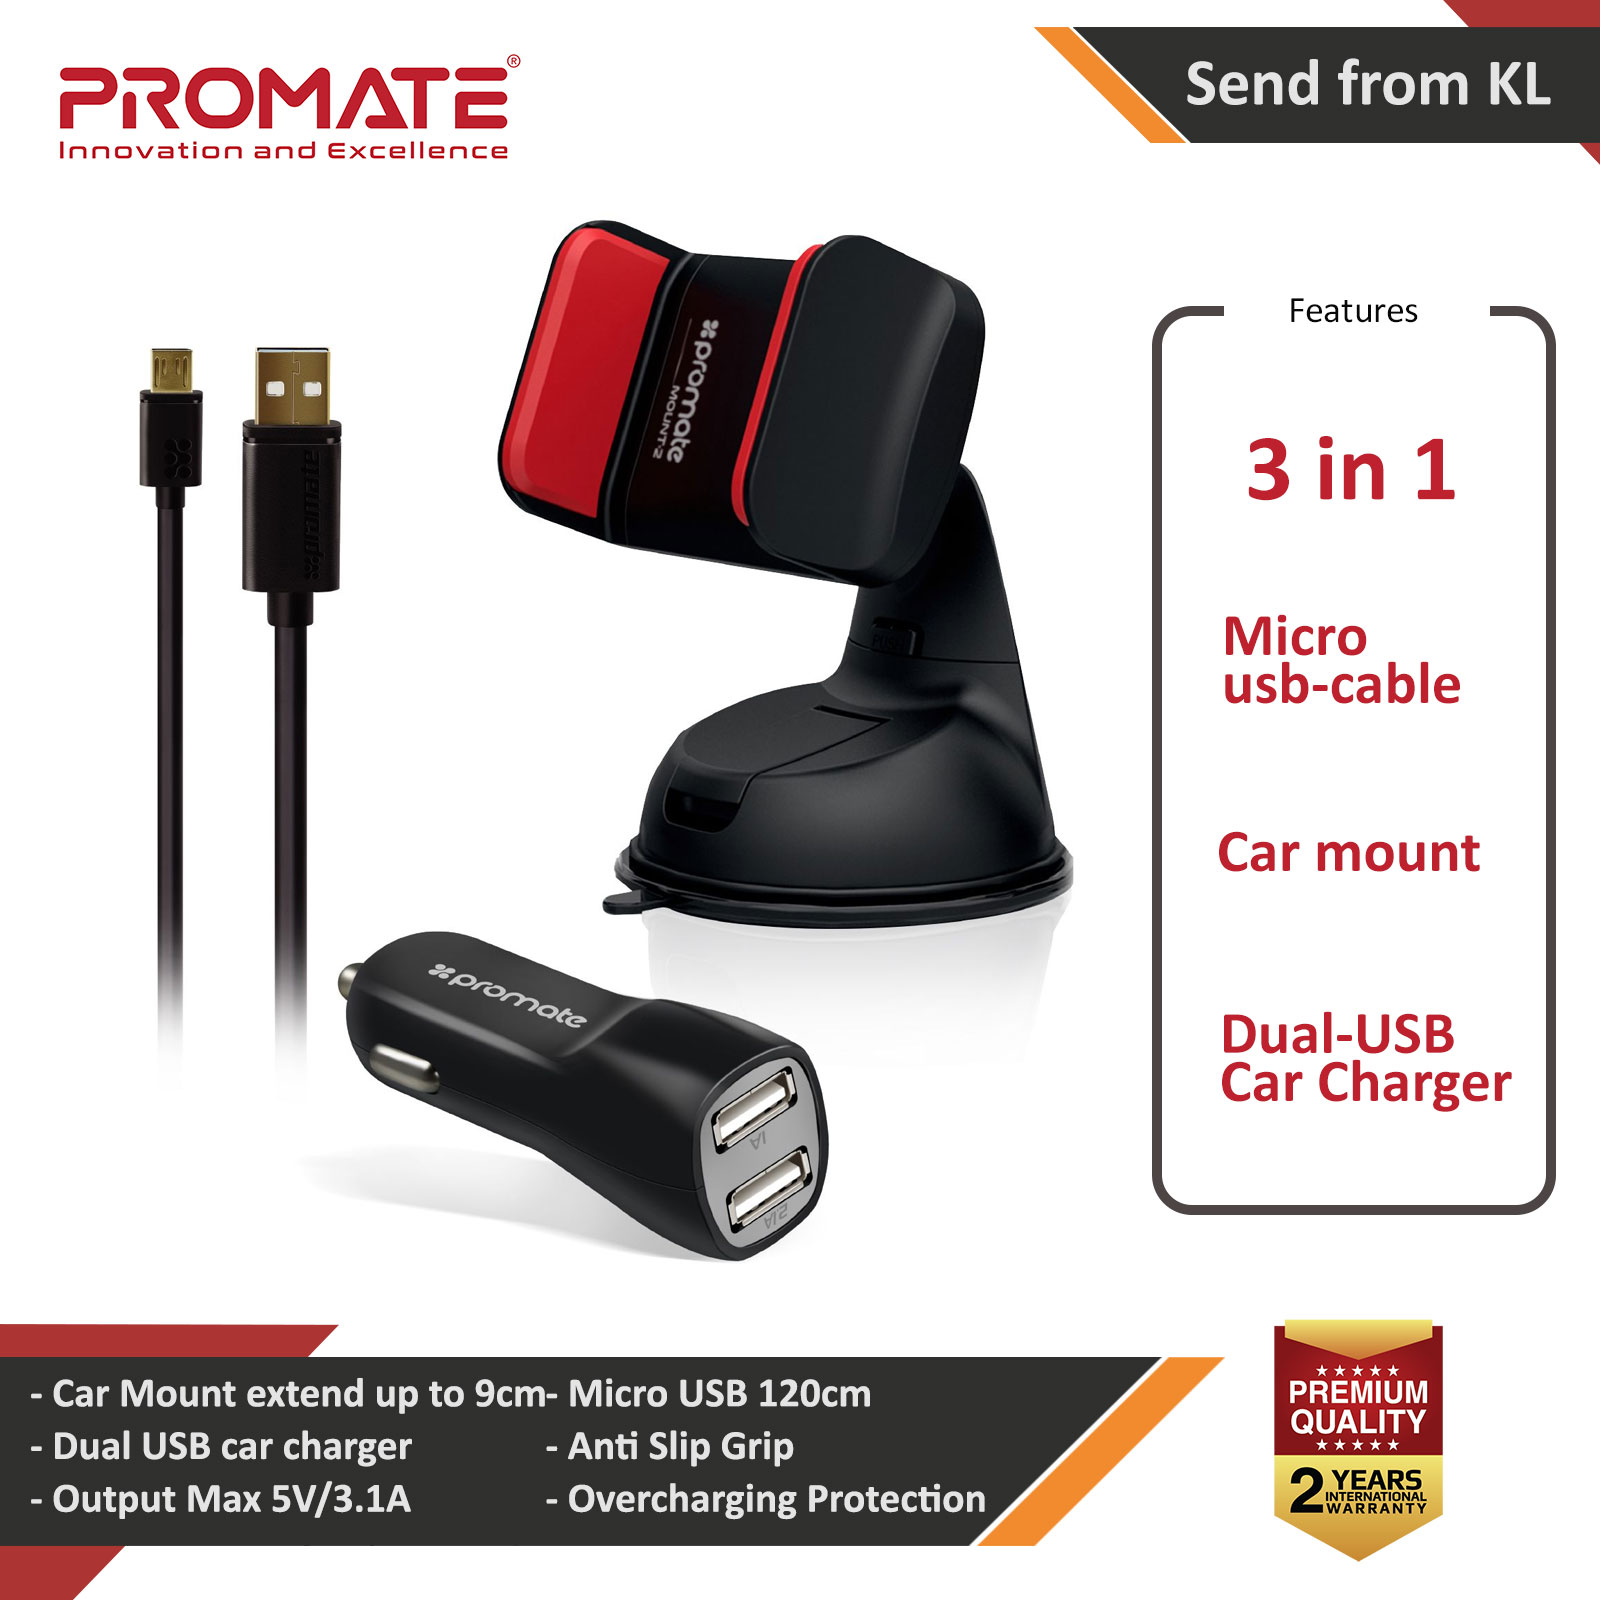 Picture of Promate Car Kit 3-In-1 Micro USB Car Kit with 3.1A Dual USB Universal Car Charger Car Mount Phone Holder for Smartphones Carkit HM (Black) Red Design- Red Design Cases, Red Design Covers, iPad Cases and a wide selection of Red Design Accessories in Malaysia, Sabah, Sarawak and Singapore 